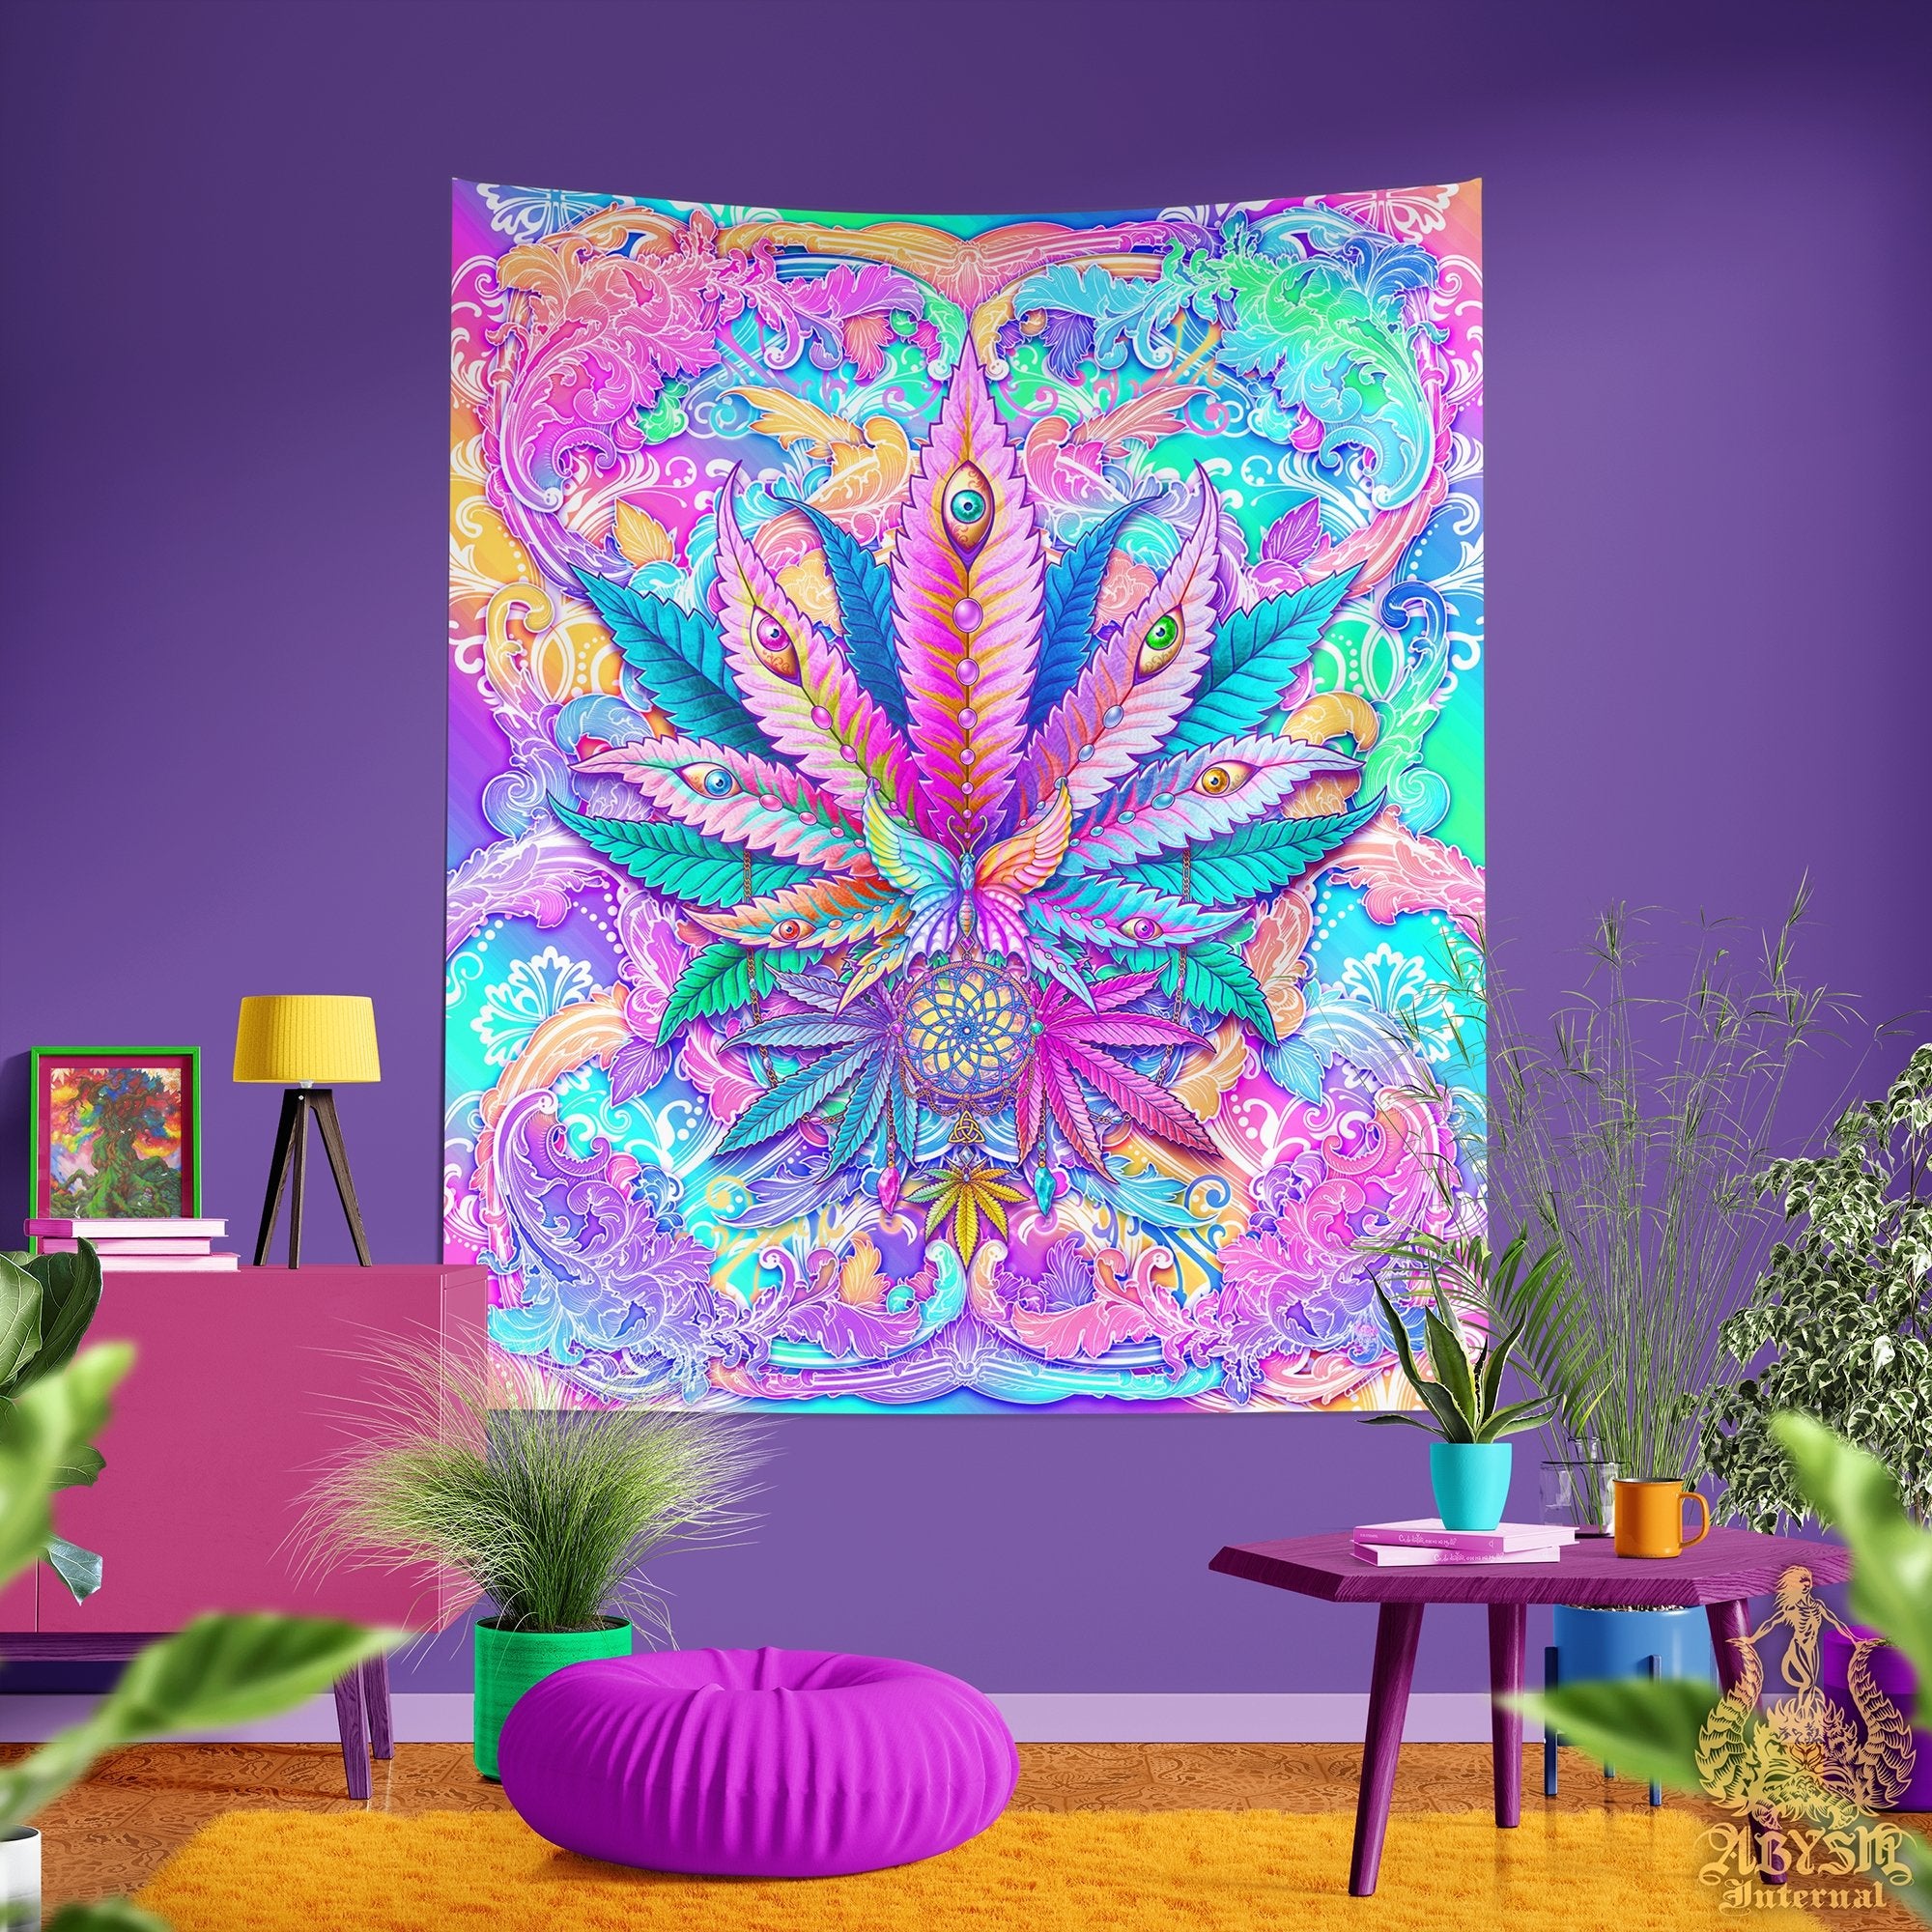 Pastel Weed Tapestry, Cannabis Shop Decor, Marijuana Wall Hanging, Pink Home Decor, Aesthetic Art Print, 420 Gift, Eclectic and Funky - Abysm Internal